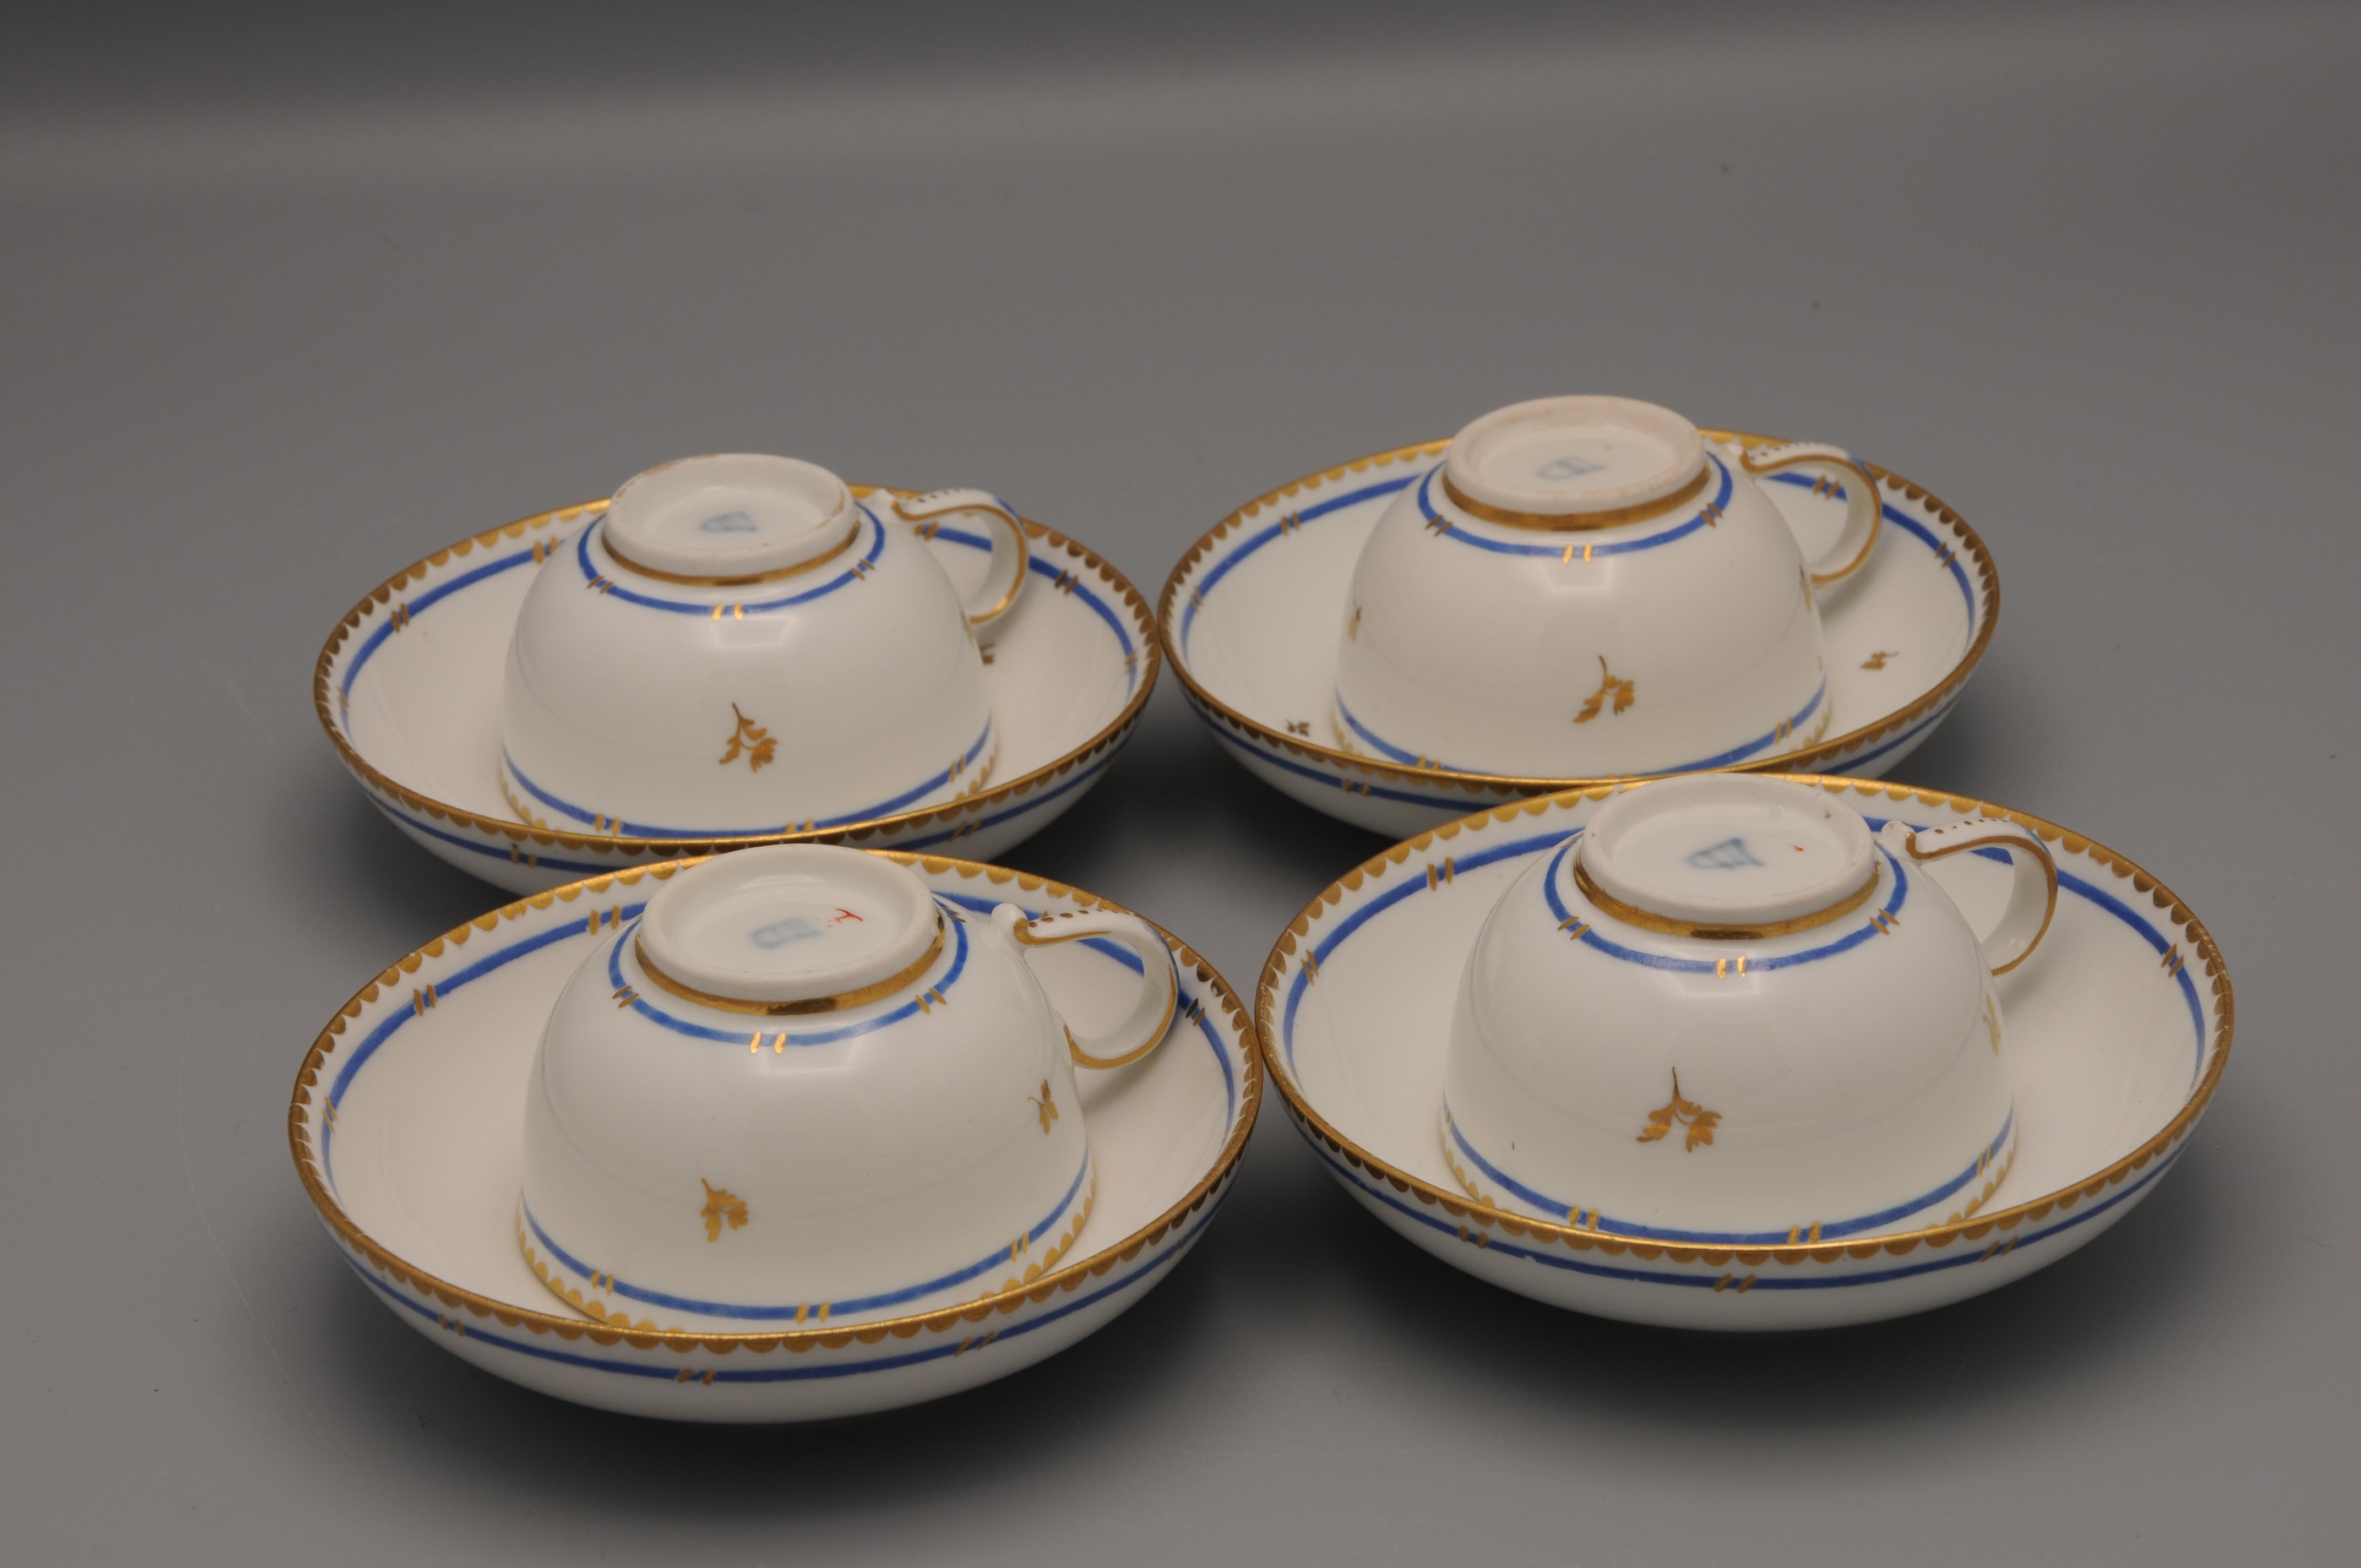 Vienna porcelain - 4 cups and saucers, 1781 For Sale 3